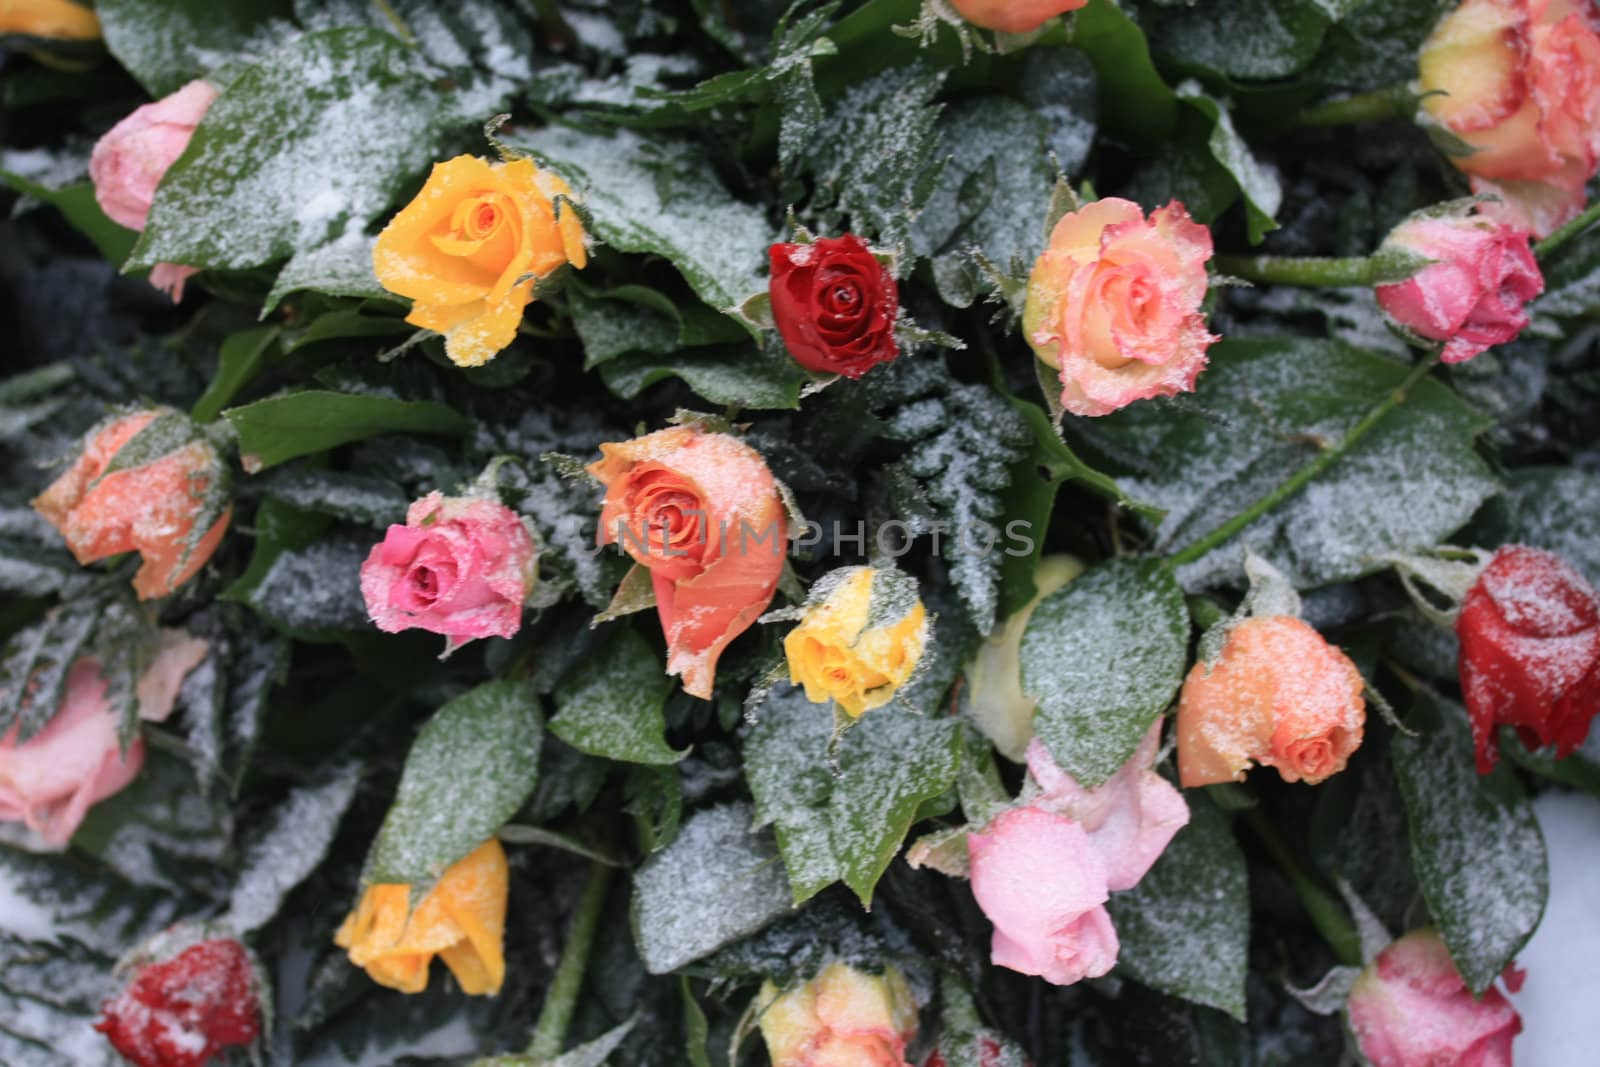 A mixed rose bouquet in the snow, yellow, pink and red